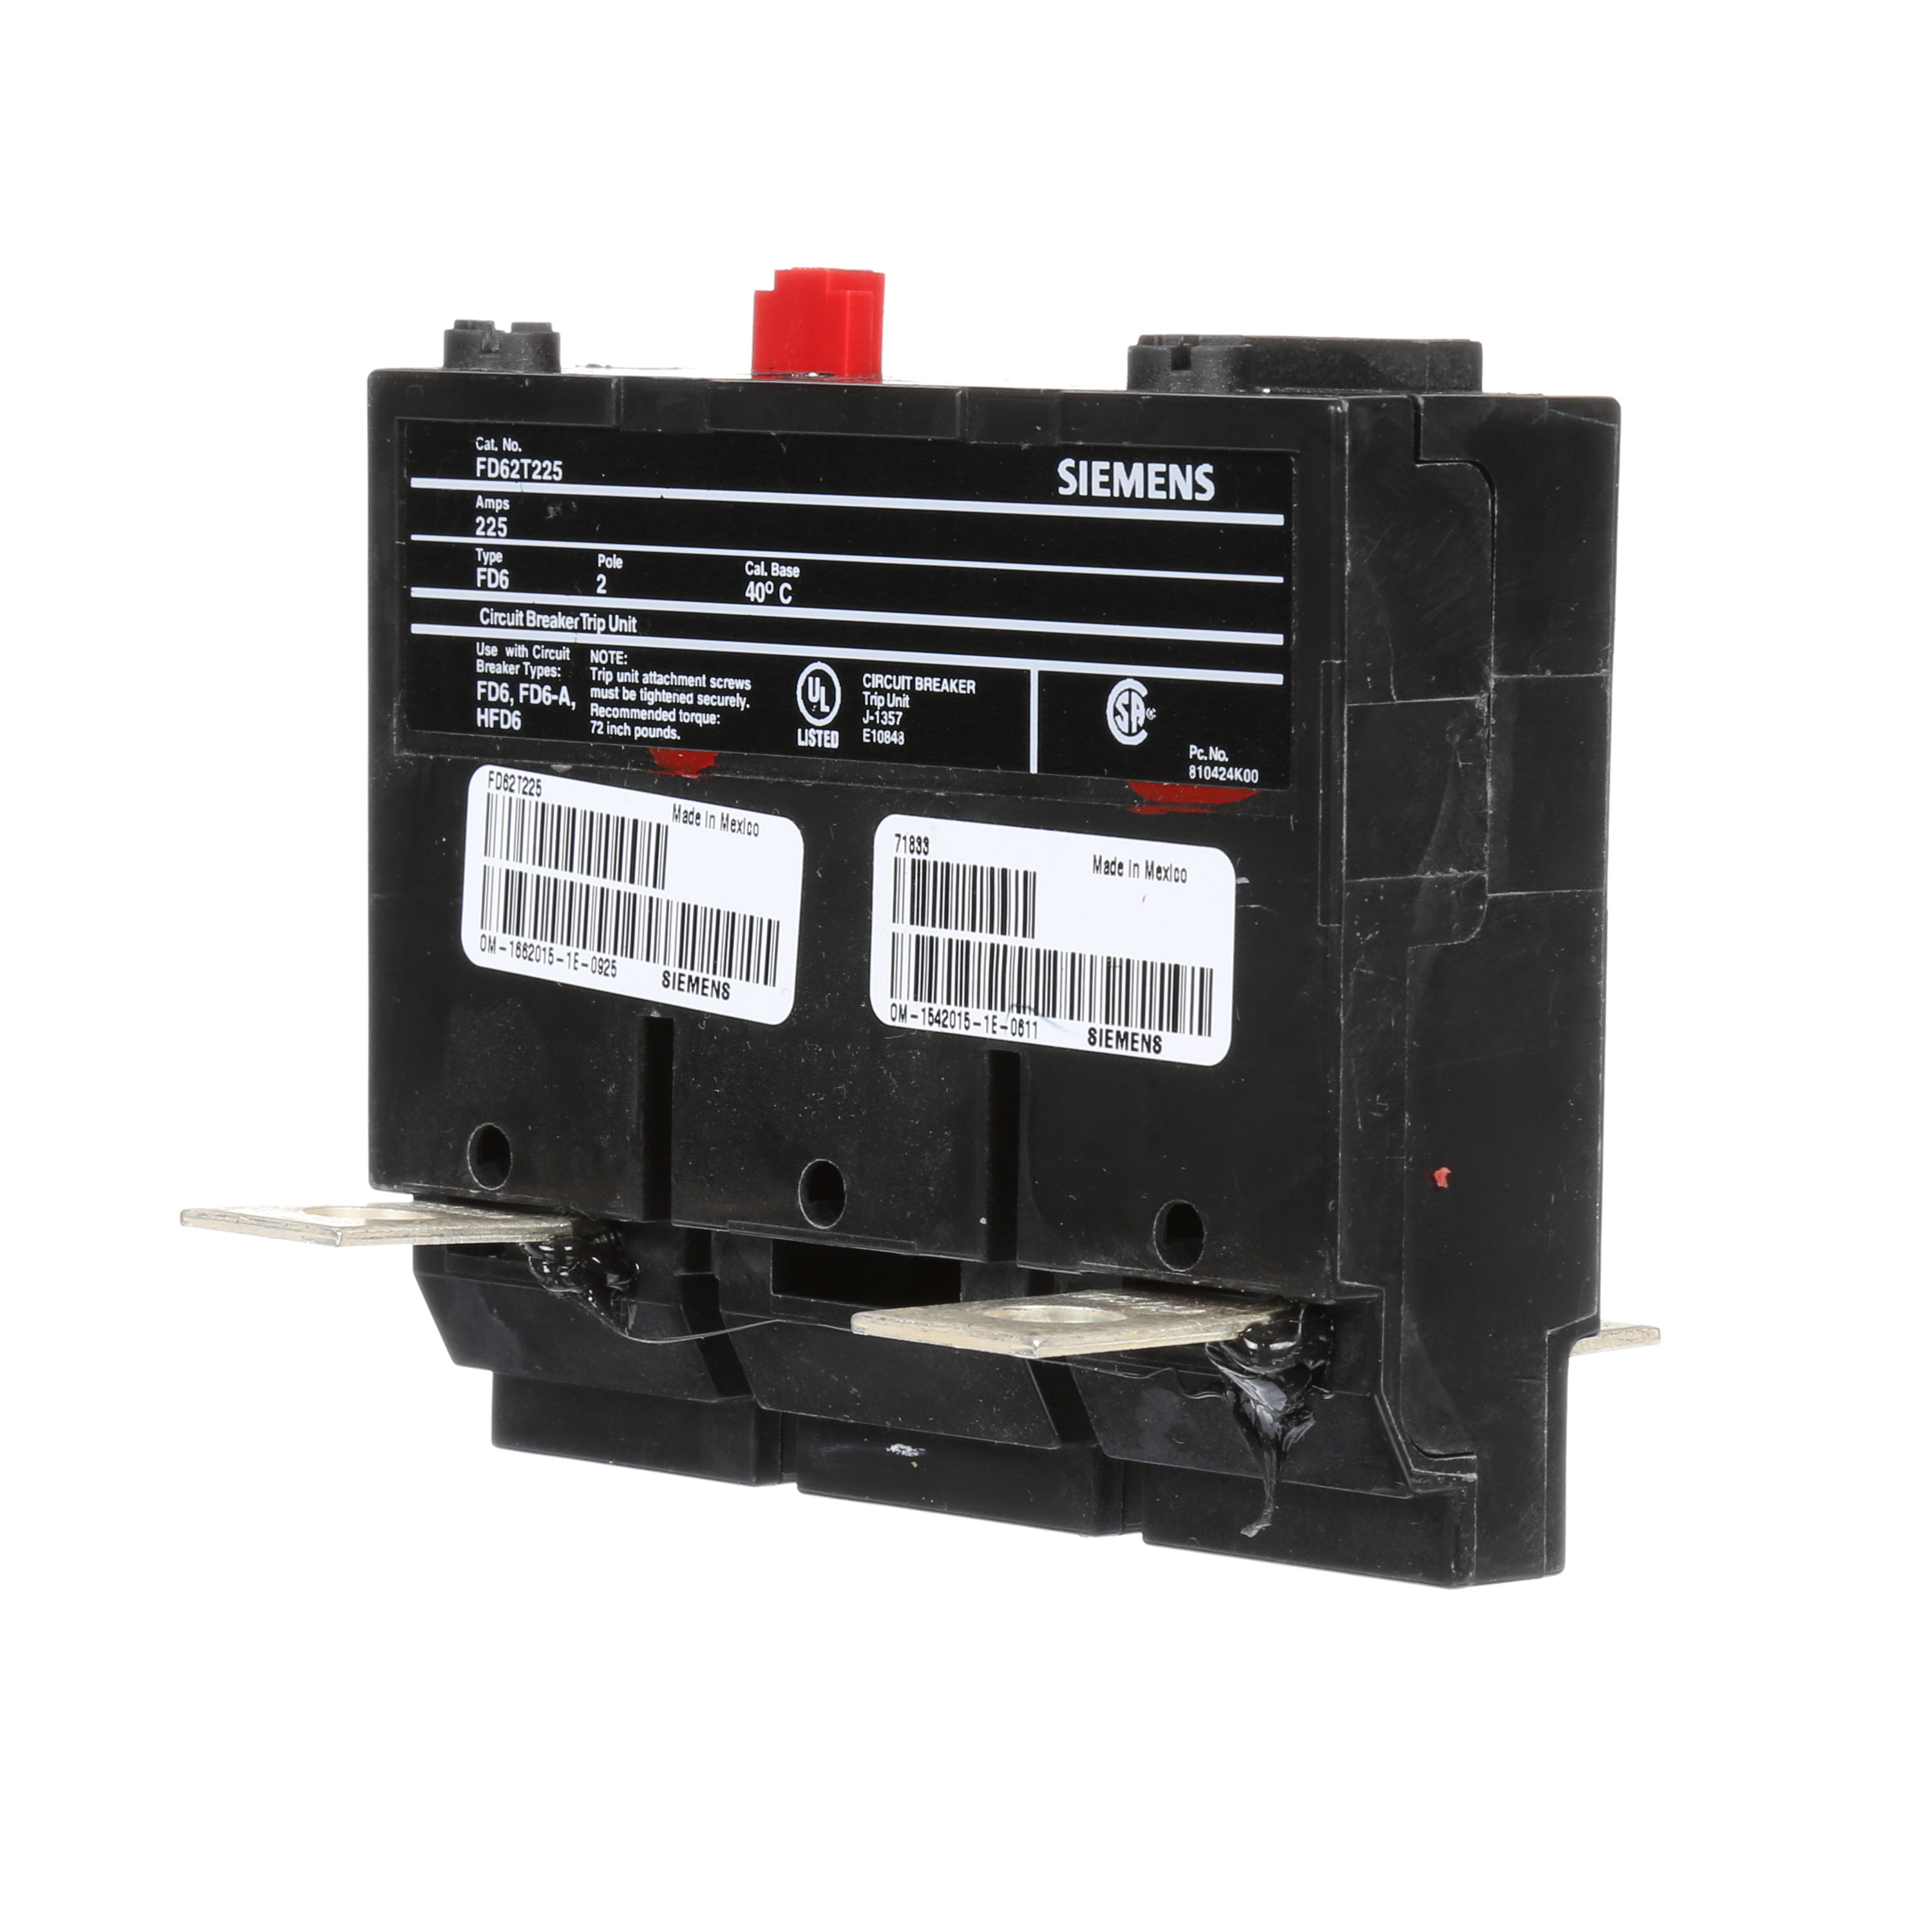 SIEMENS LOW VOLTAGE SENTRON MOLDED CASE CIRCUIT BREAKER. THERMAL - MAGNETIC TRIP UNIT FOR FD FRAME 225A 2-POLE 600V BREAKERS.